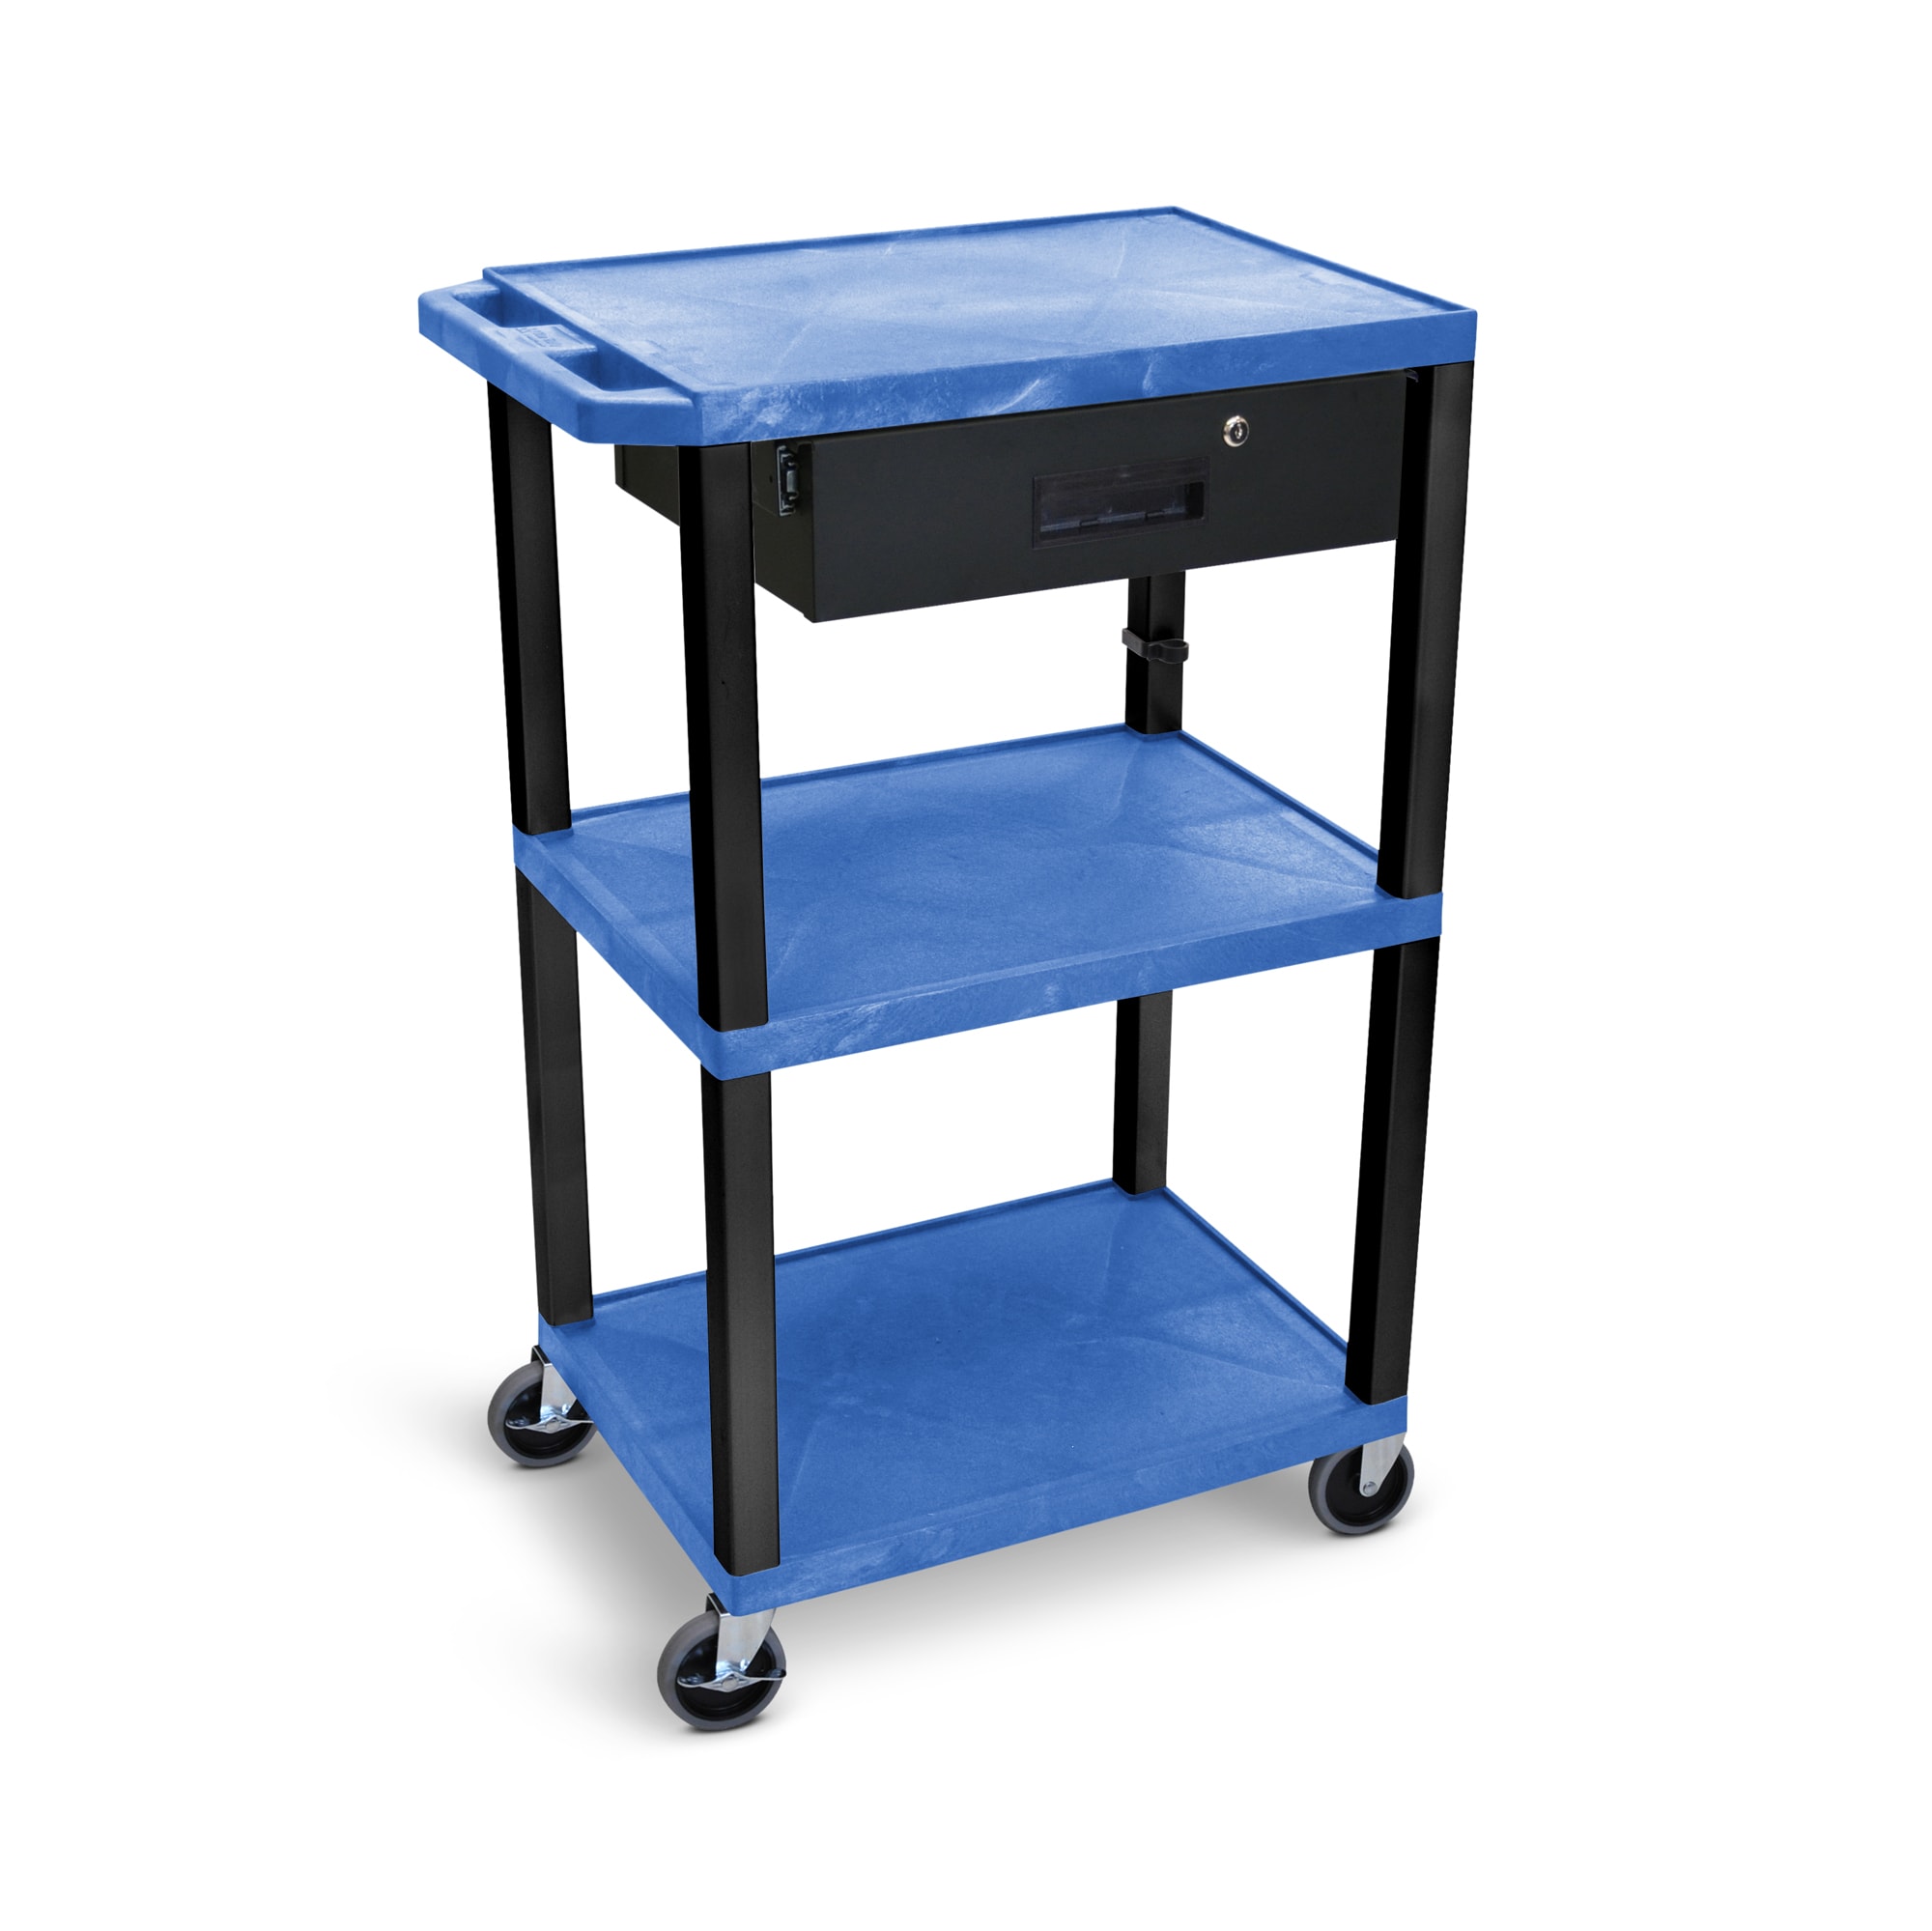  Rubbermaid Commercial Products Heavy Duty 3-Shelf Rolling  Service/Utility/Push Cart, 200 lbs. Capacity, Black, for  Foodservice/Restaurant/Cleaning/Workplace : Office Products